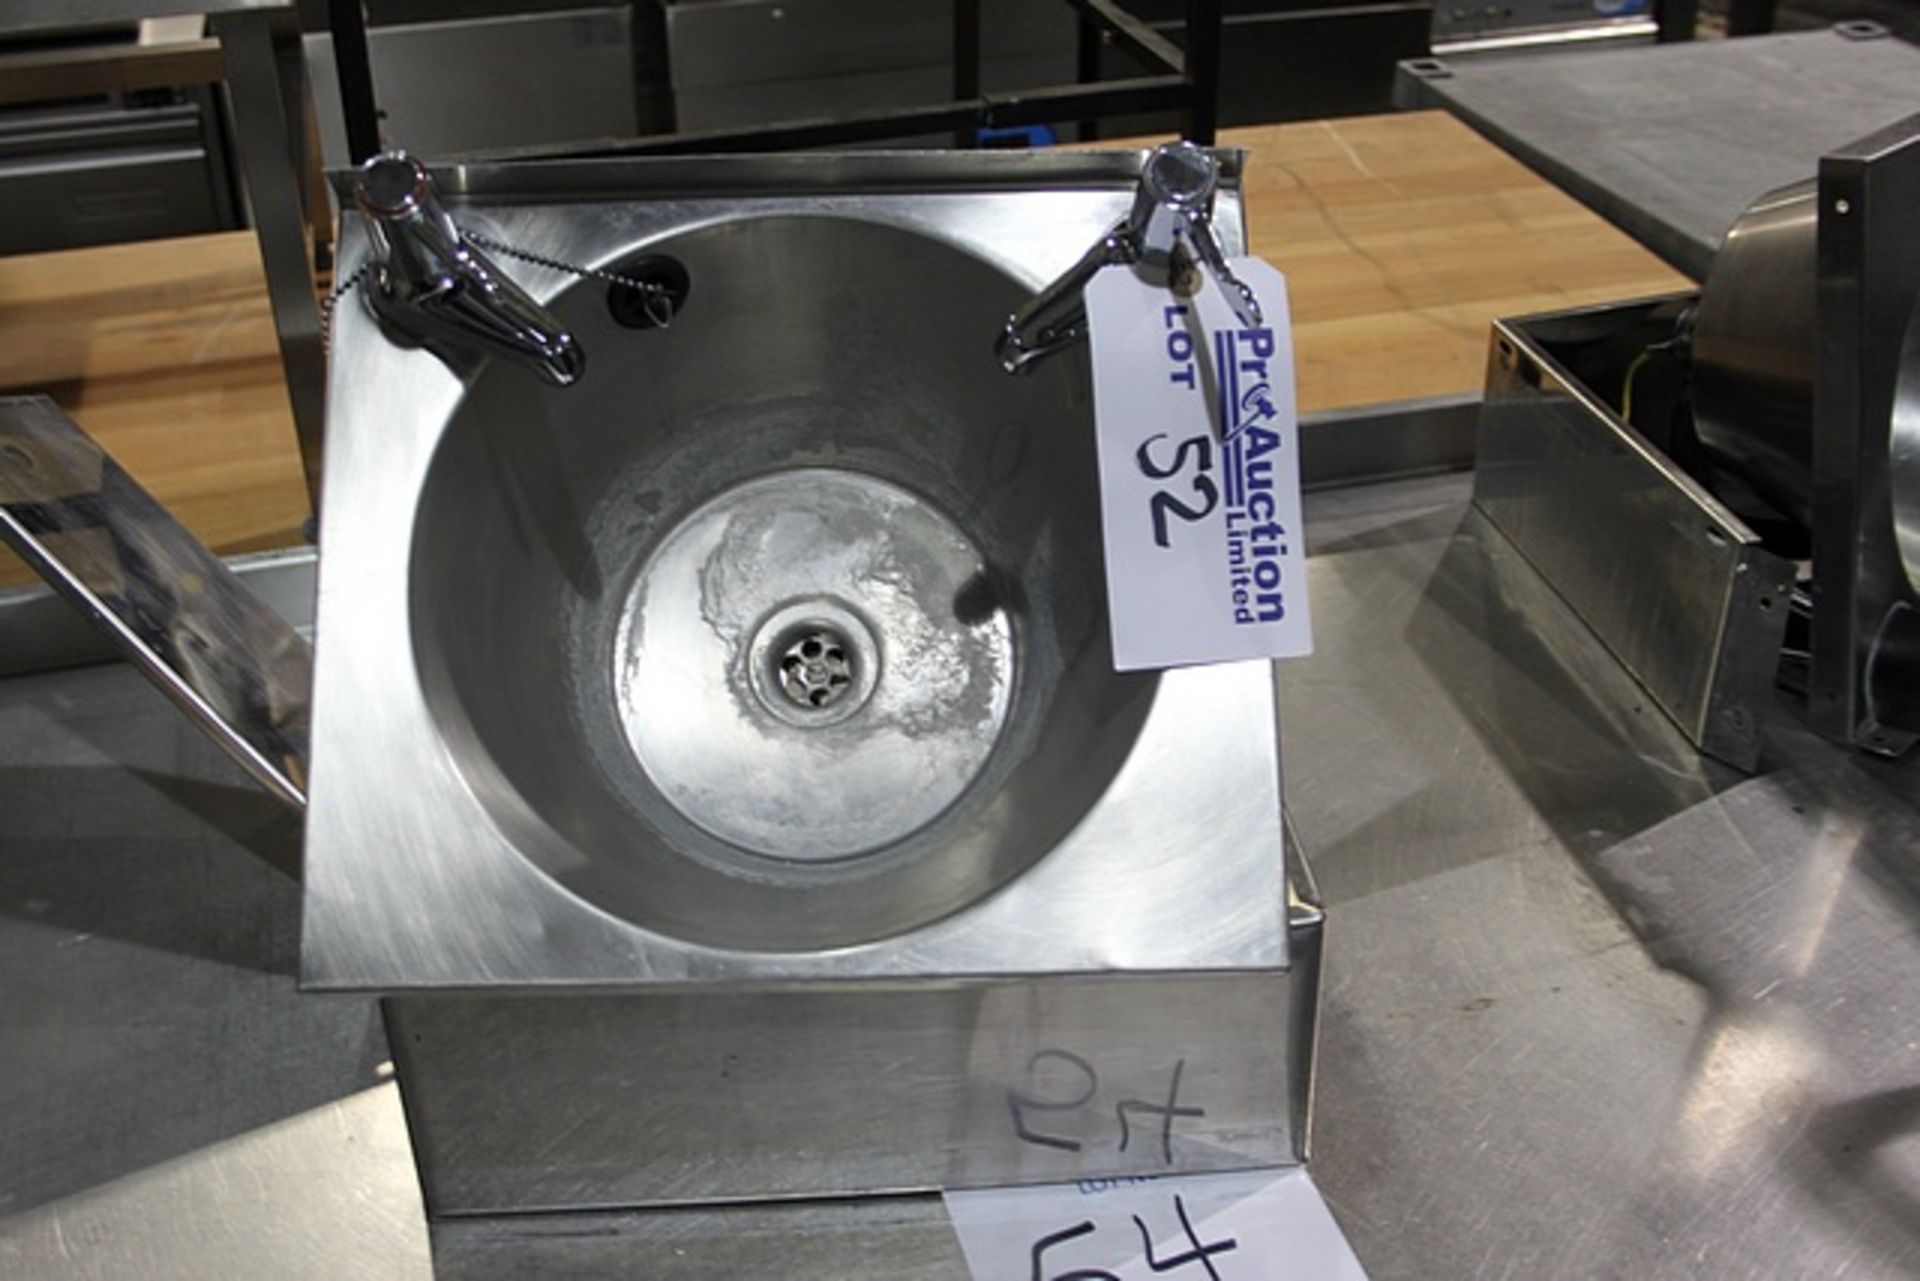 Stainless steel wall mounted hand wash basin